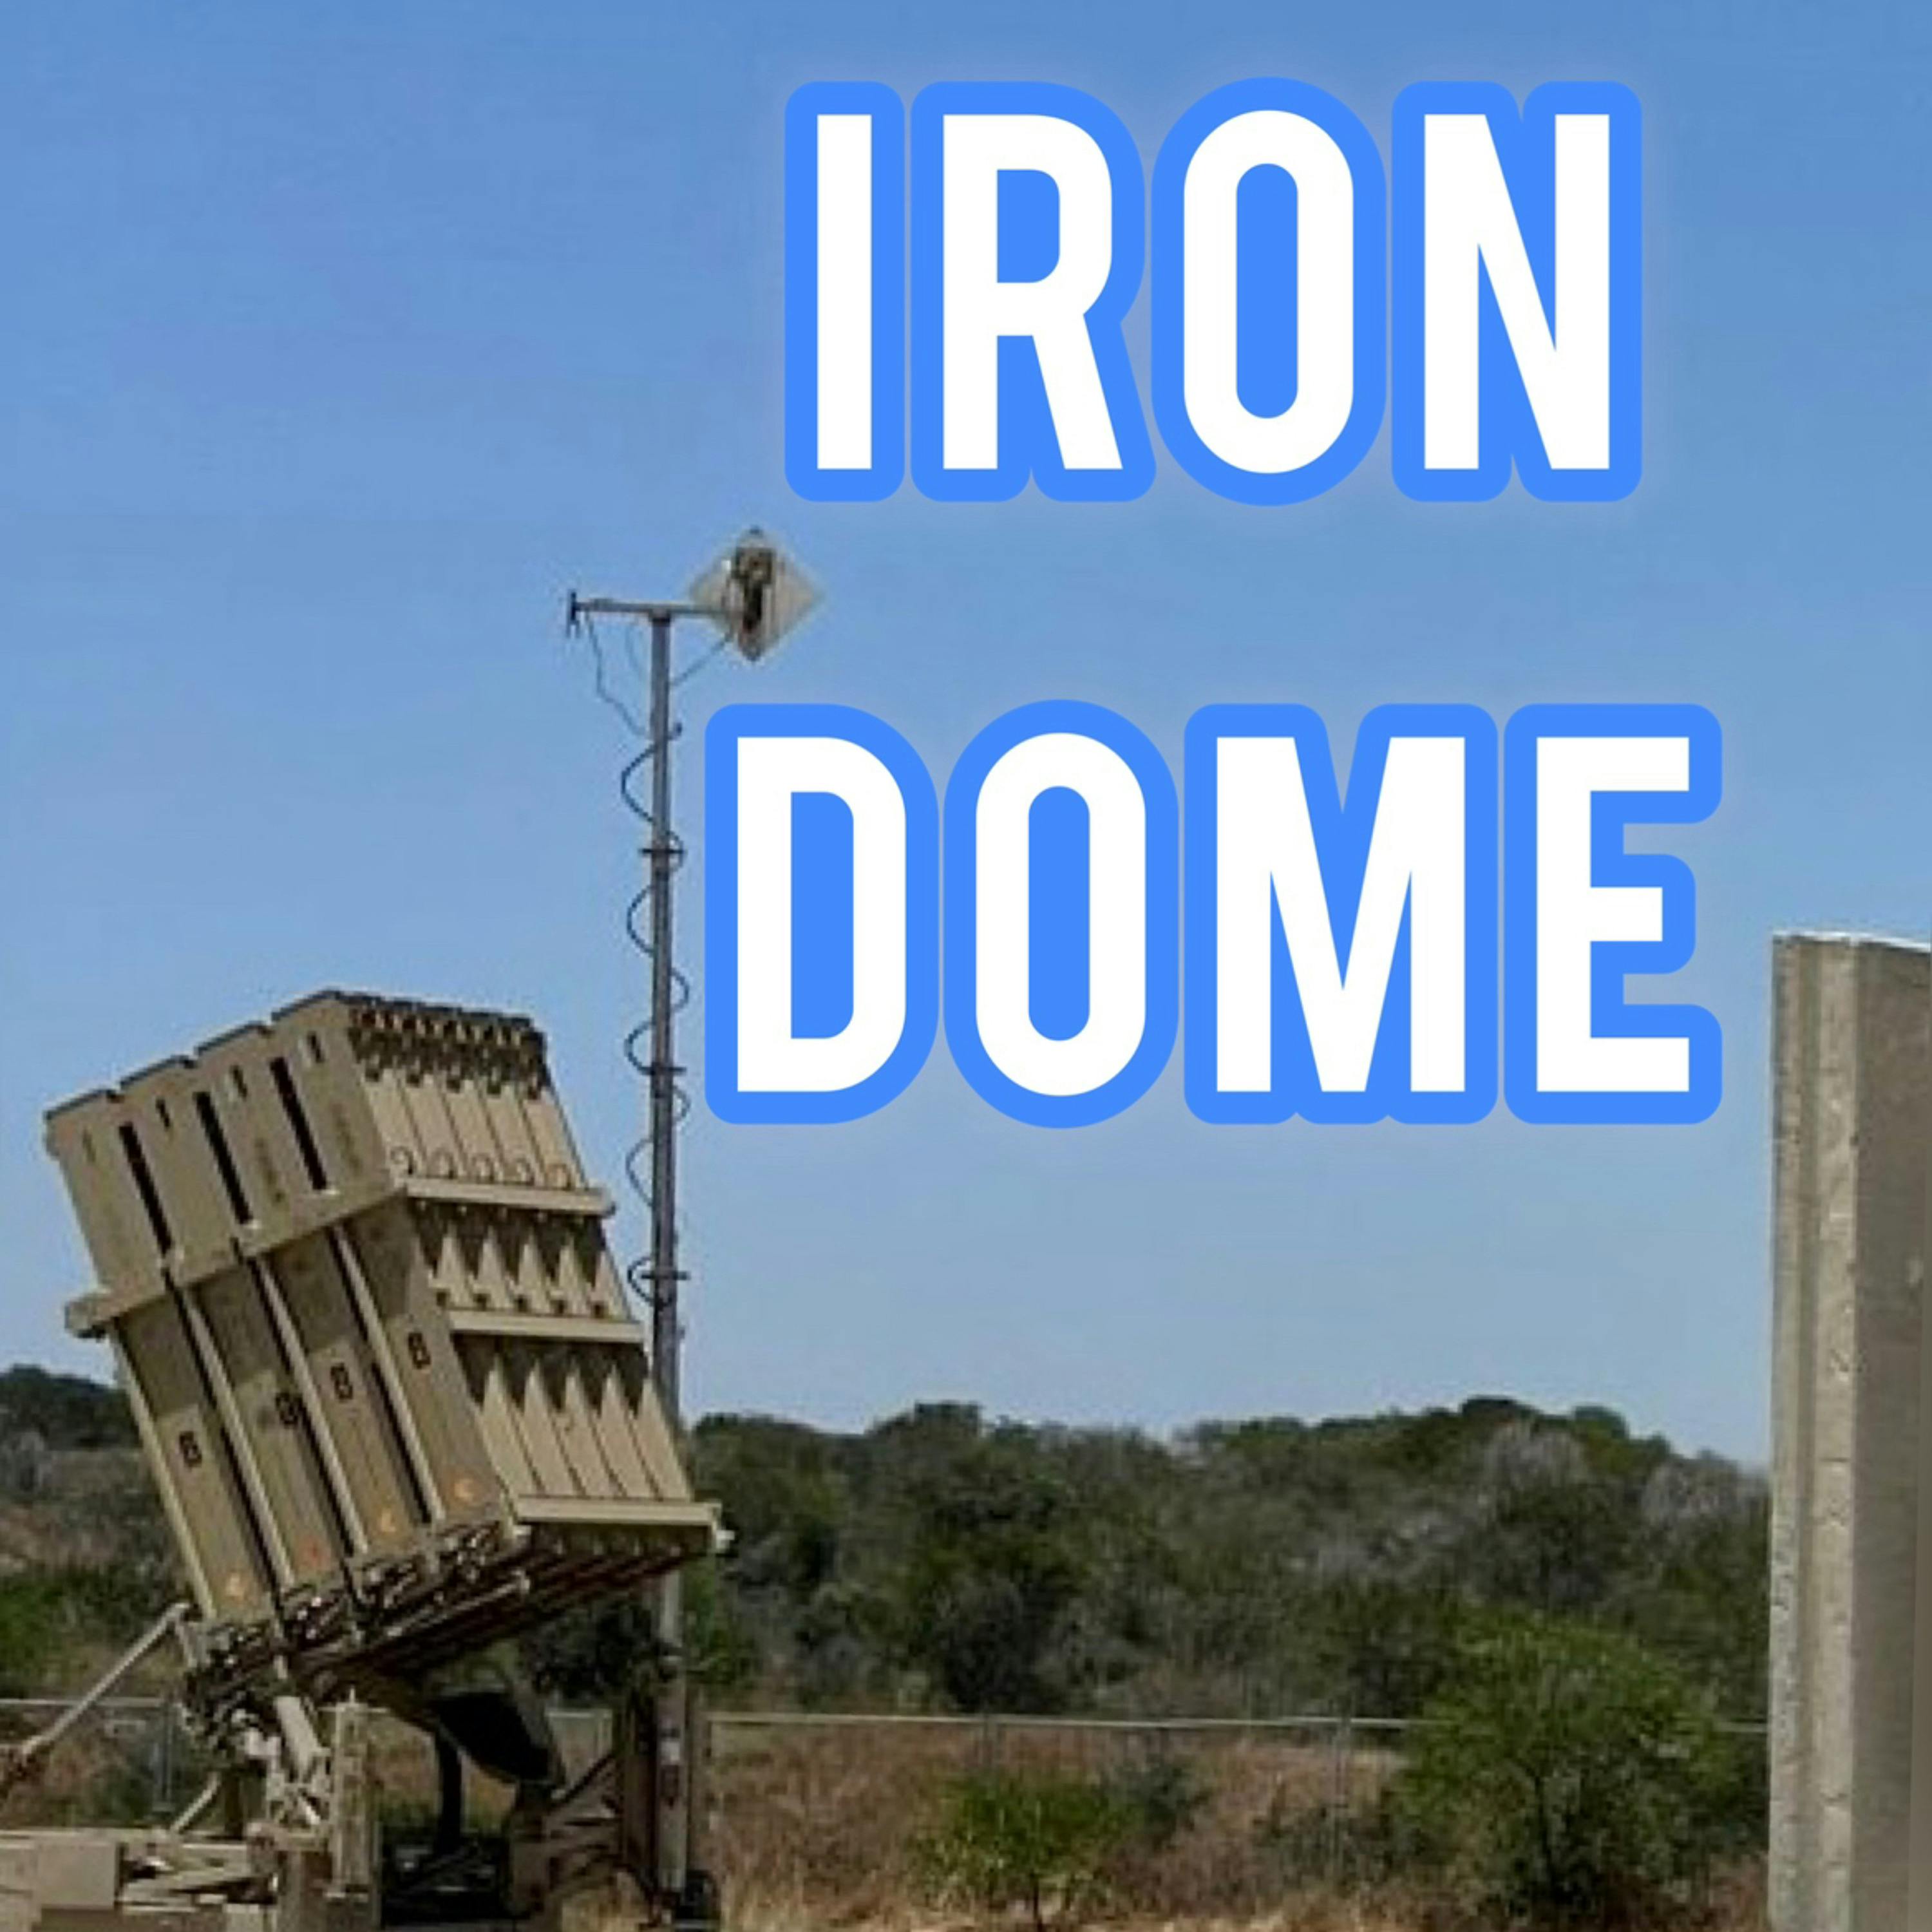 116: Inside an Iron Dome staging post and crossing Kerem Shalom into Gaza: Jonny heads for Israel’s Gaza border